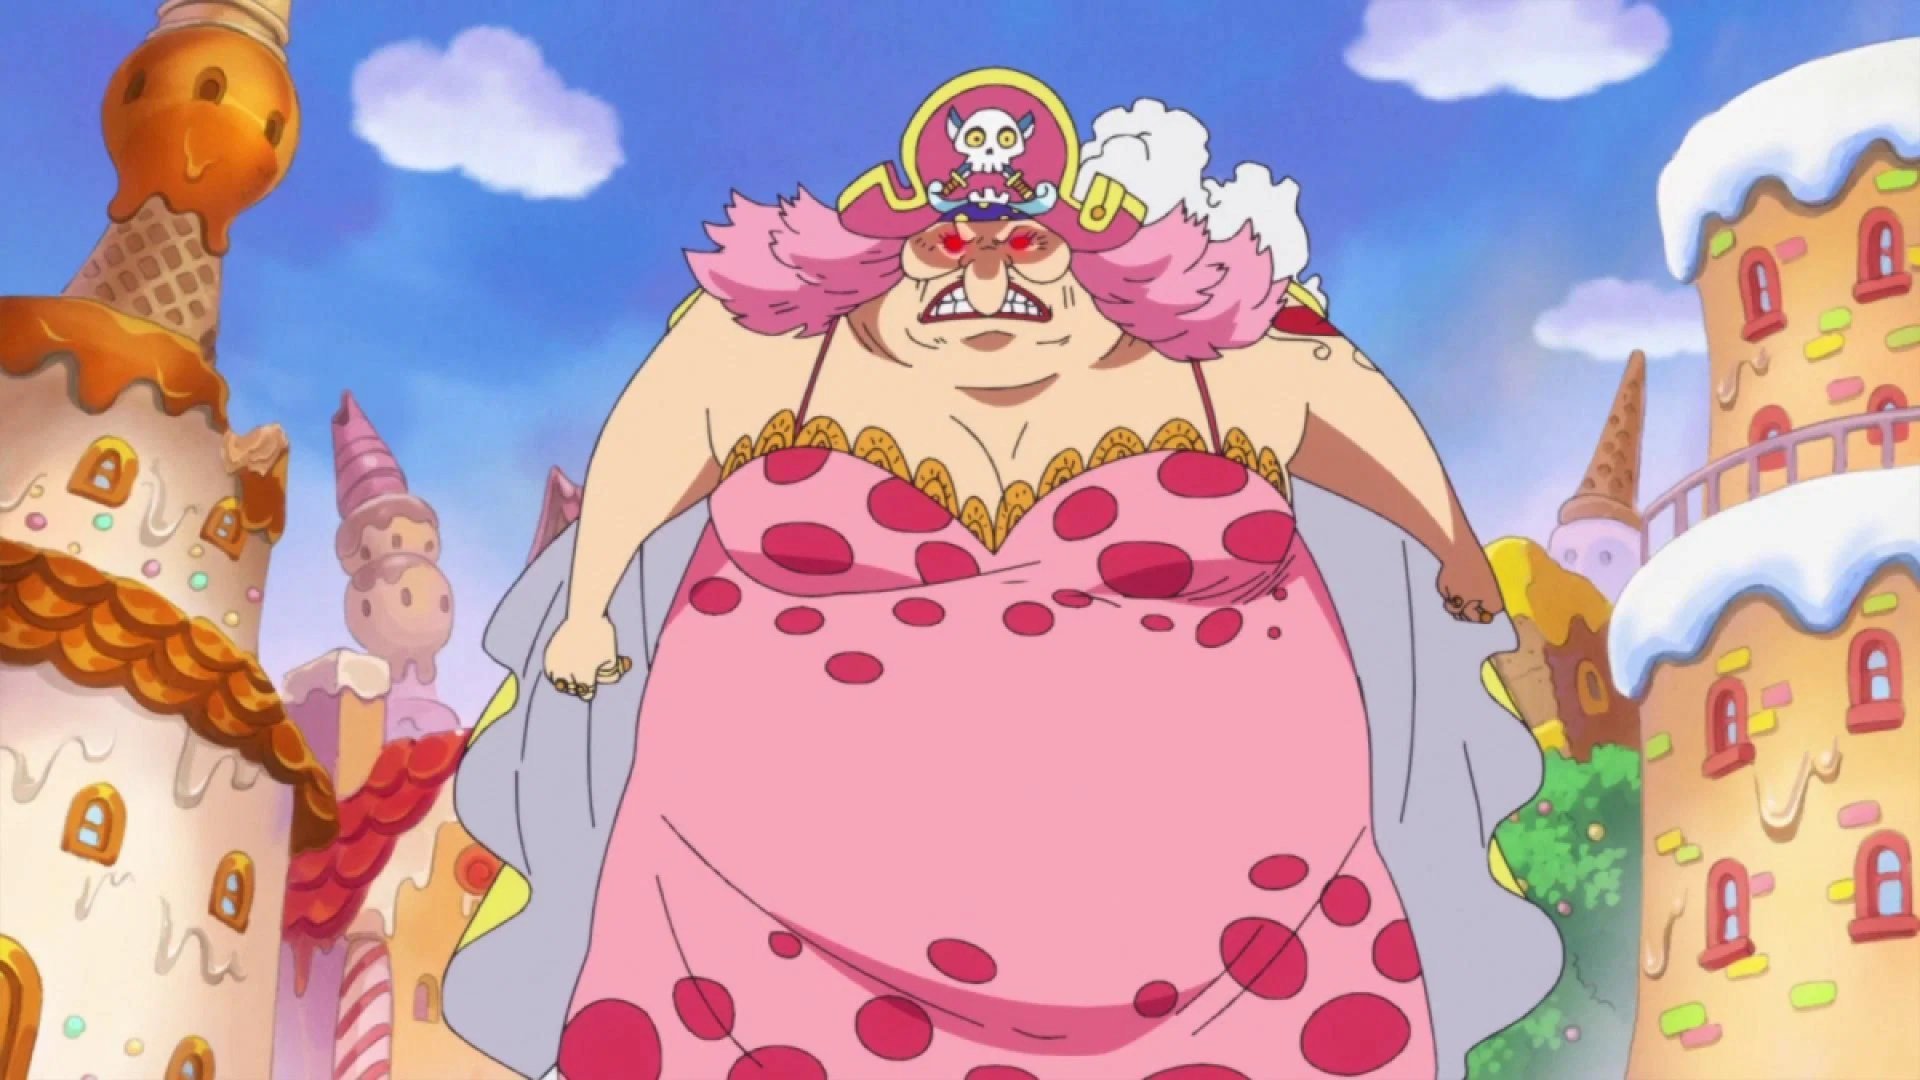 Big mom on the warpath in 'One Piece'